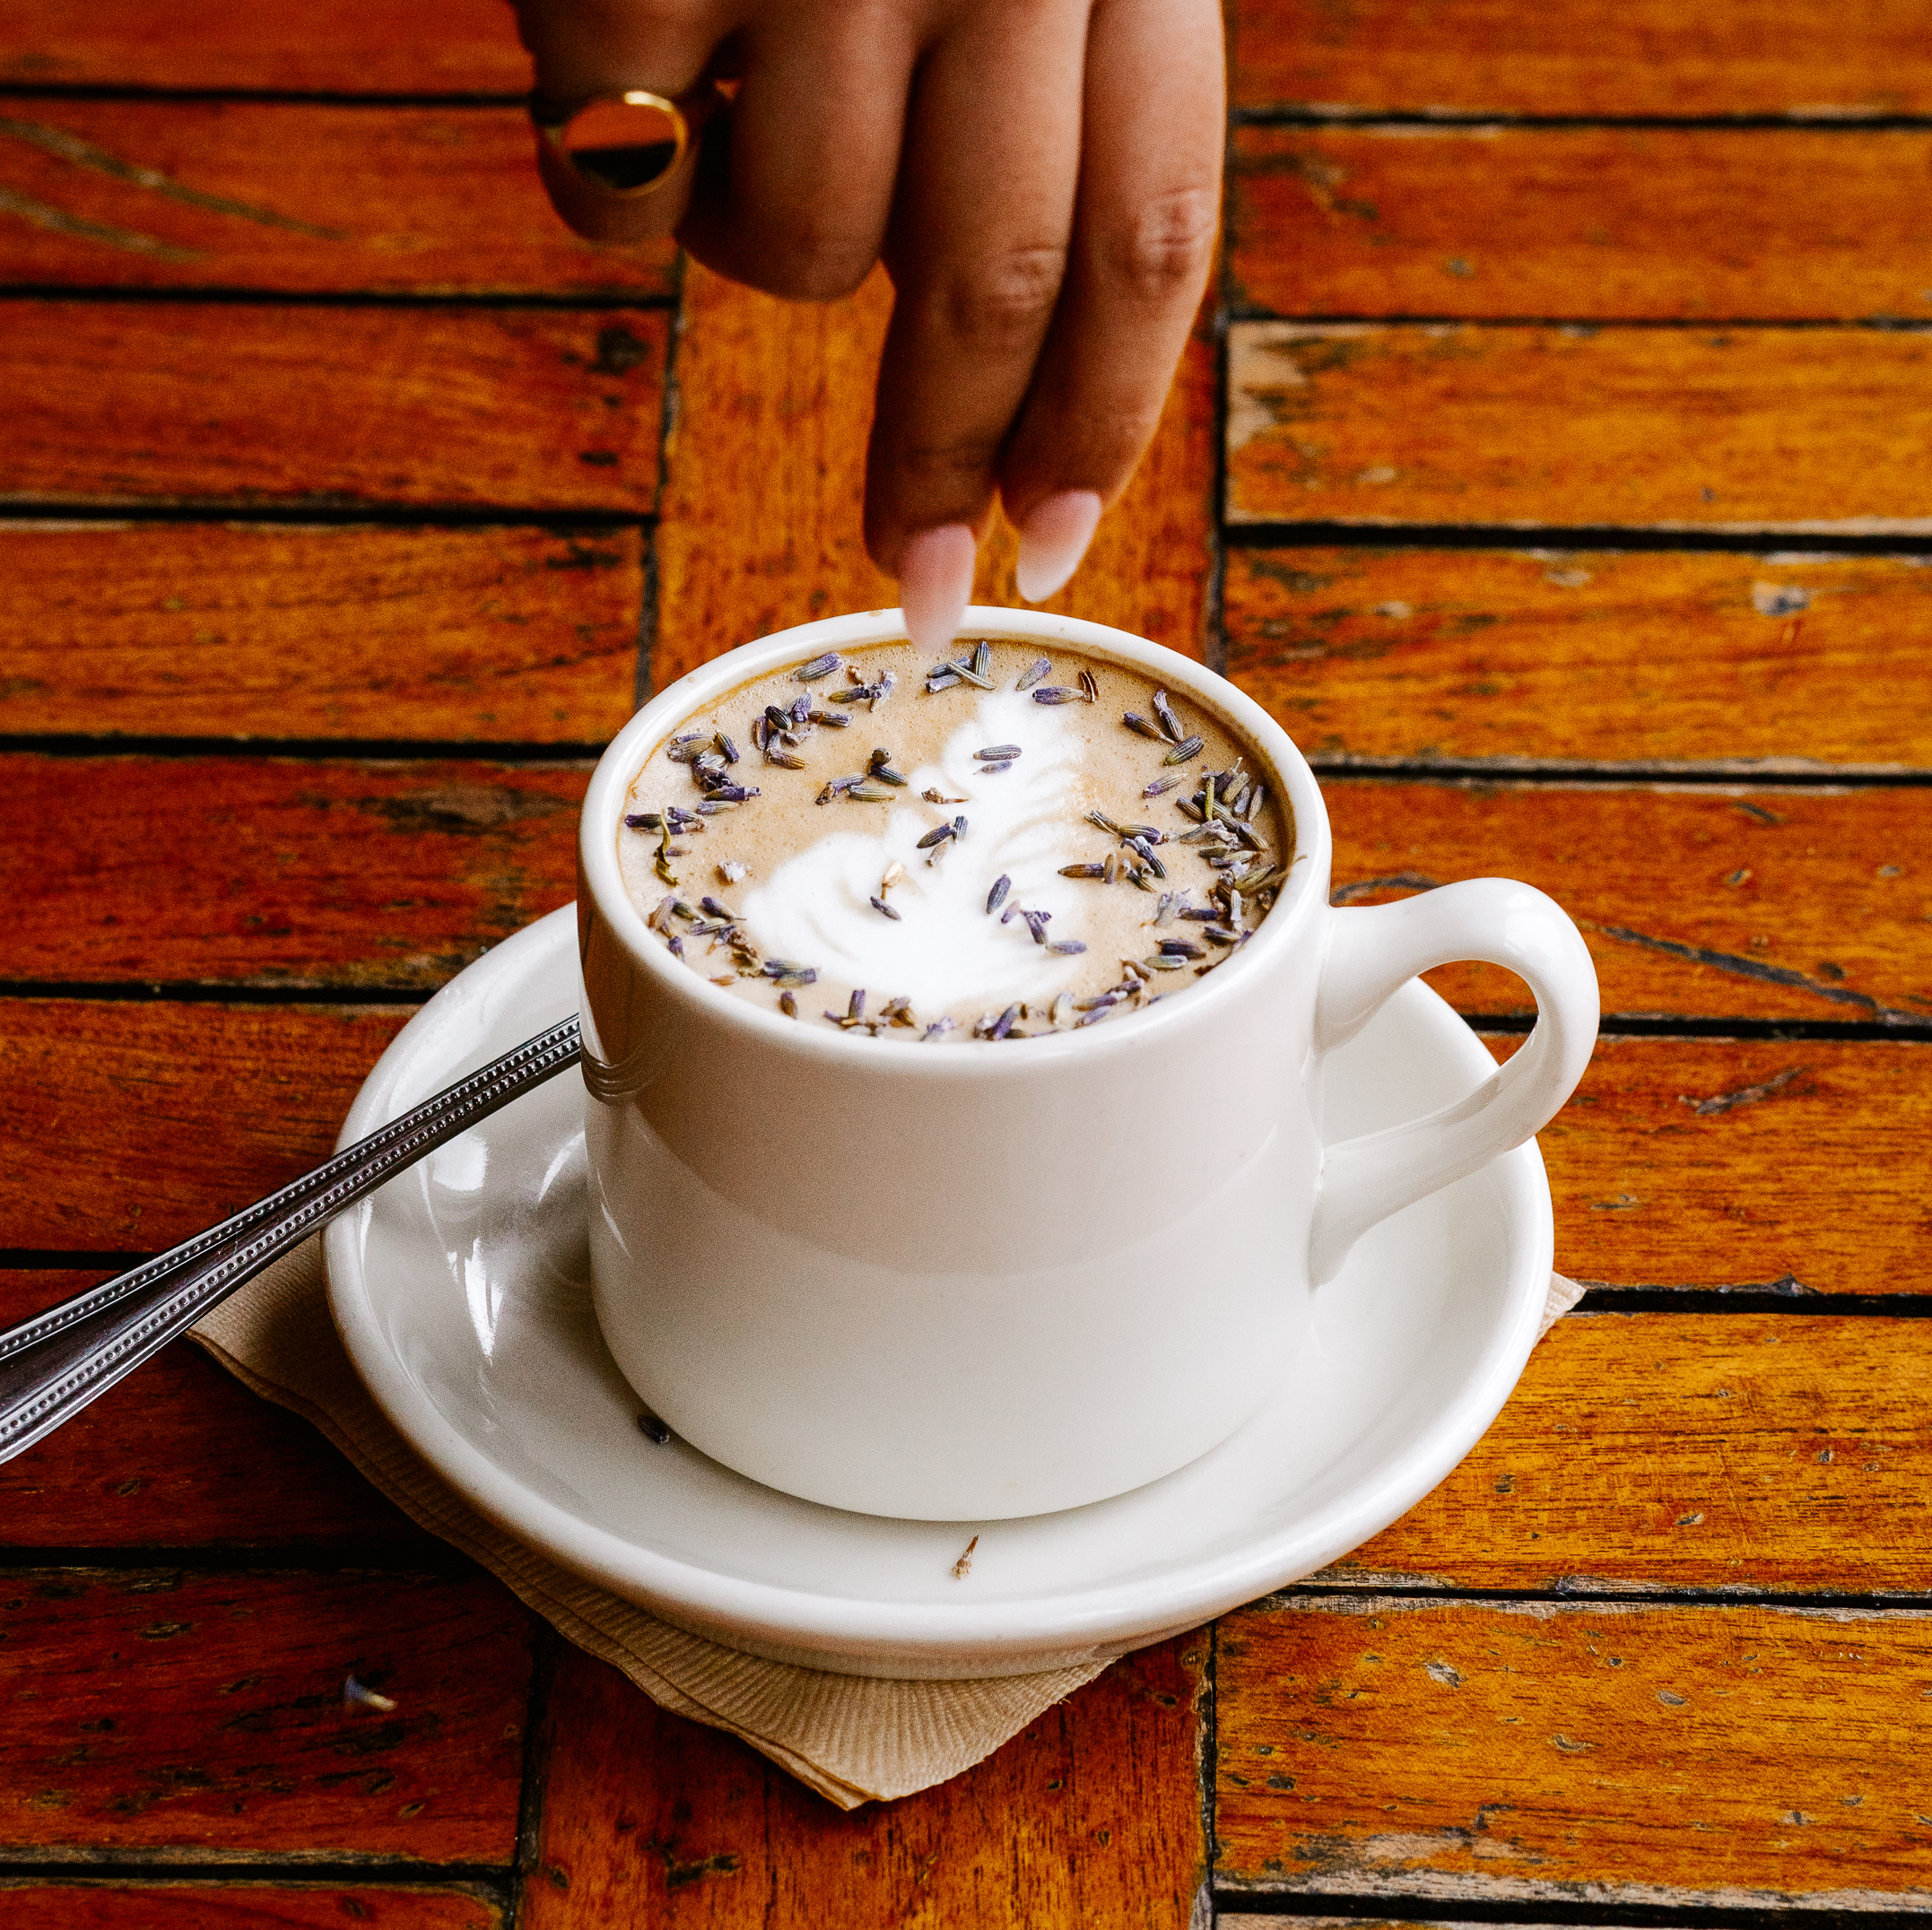 A well-manicured hand drops lavender leaves onto a freshly brewed latte in a mug.